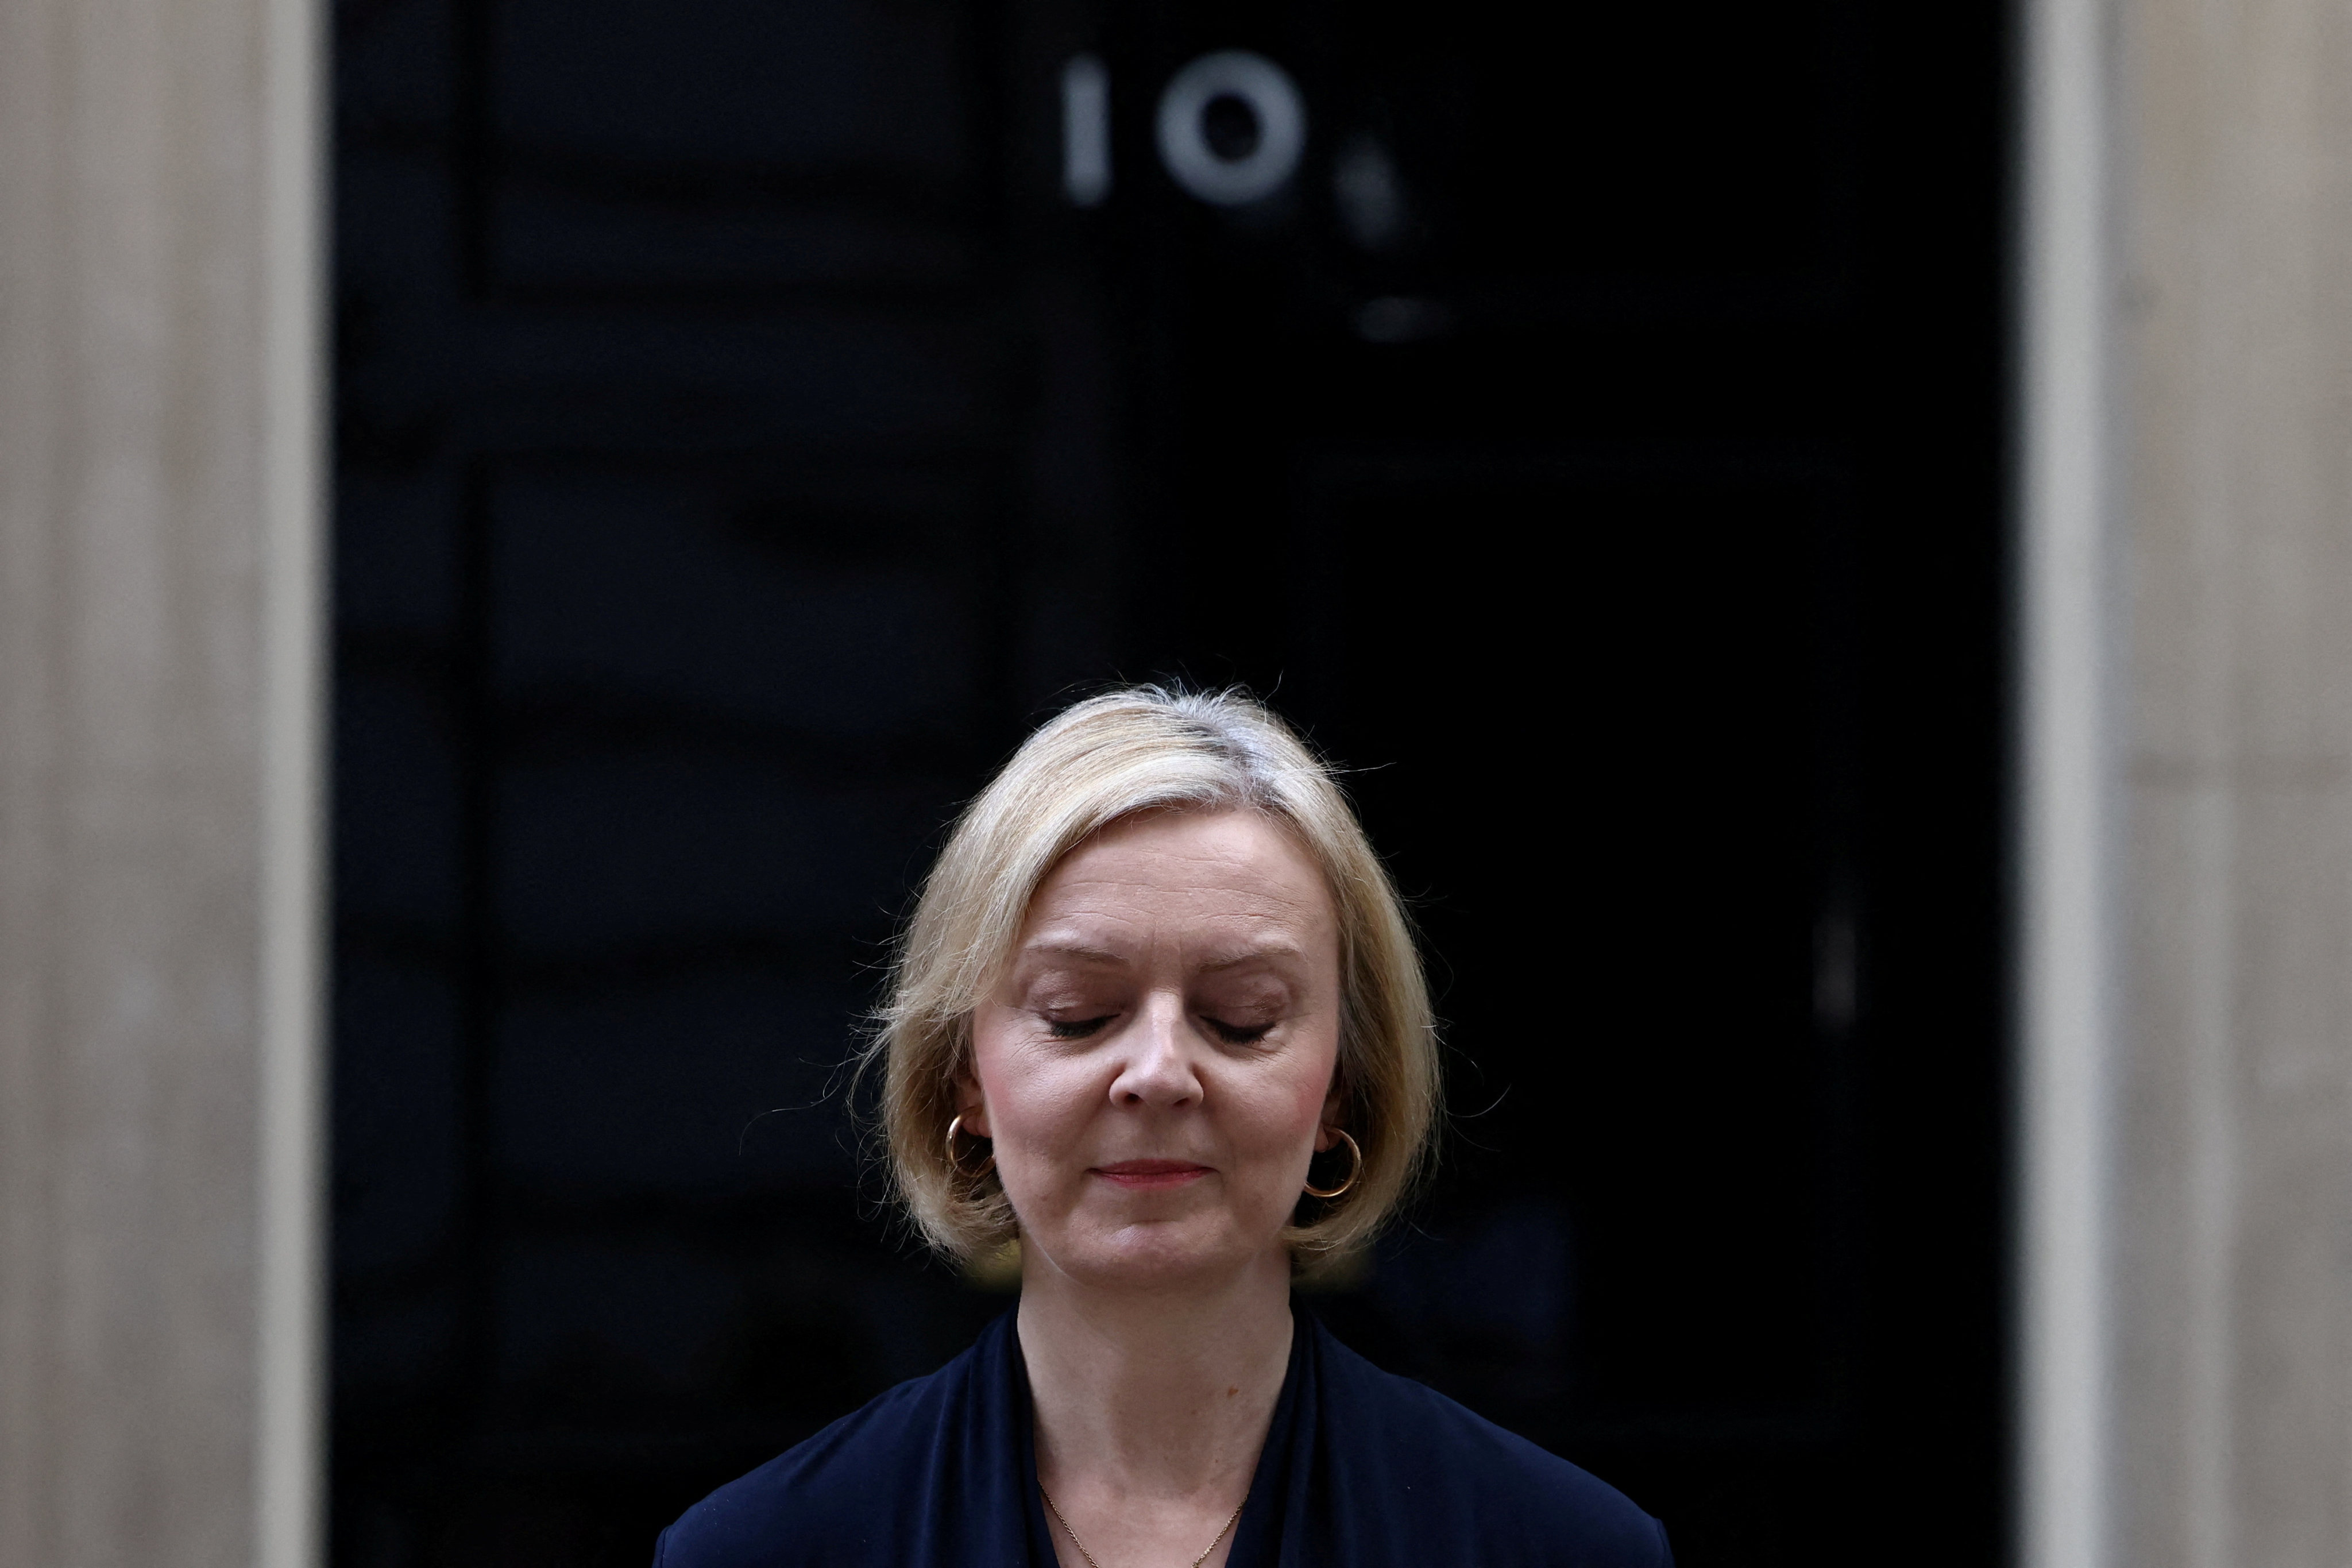 British Prime Minister Liz Truss announces her resignation outside Number 10 Downing Street in London, Britain, on October 20, 2022. Photo: Reuters